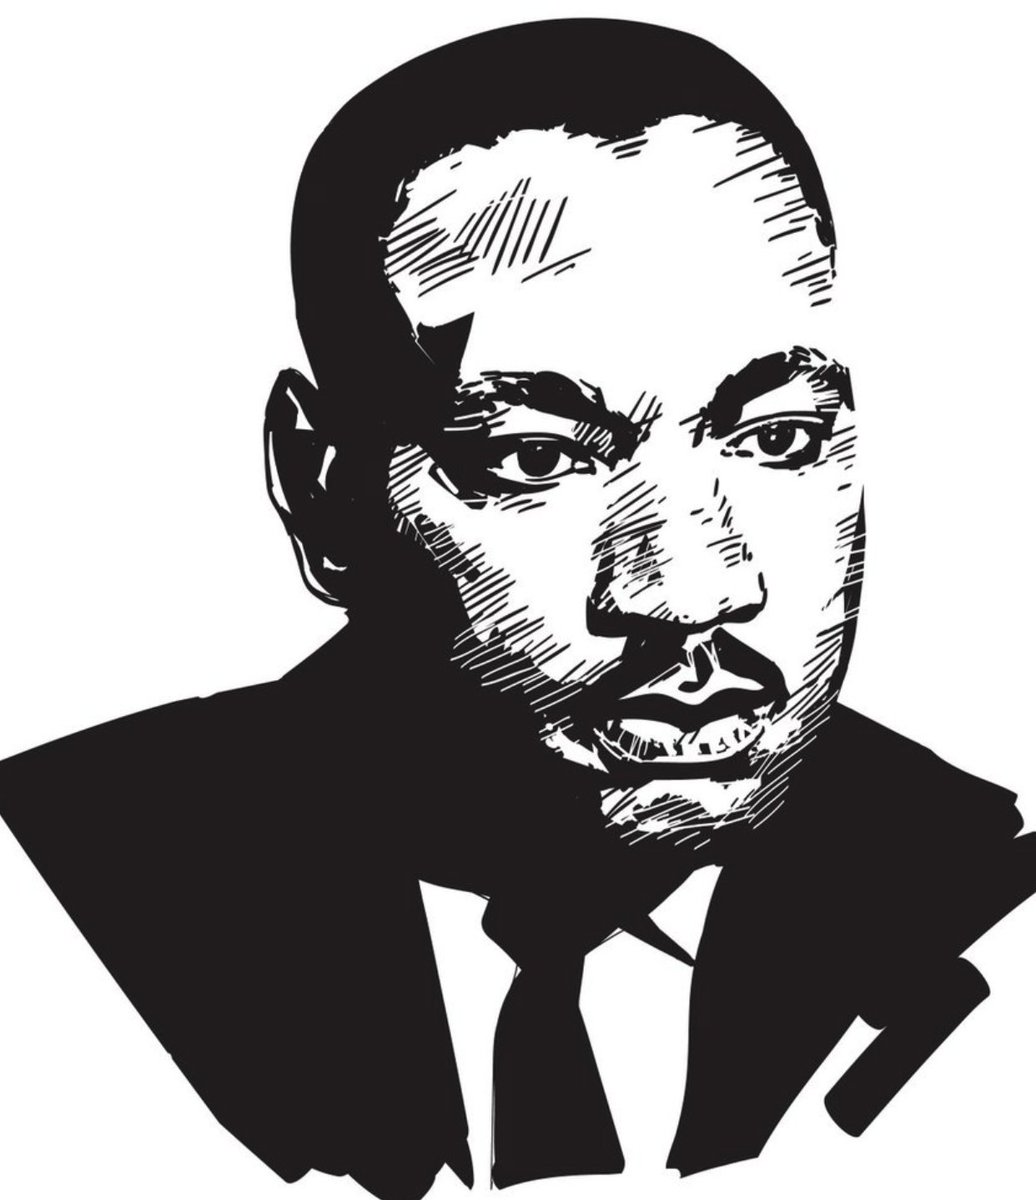 16/ “Of all the forms of inequality, injustice in health care is the most shocking.” Dr. Martin Luther King, Jr